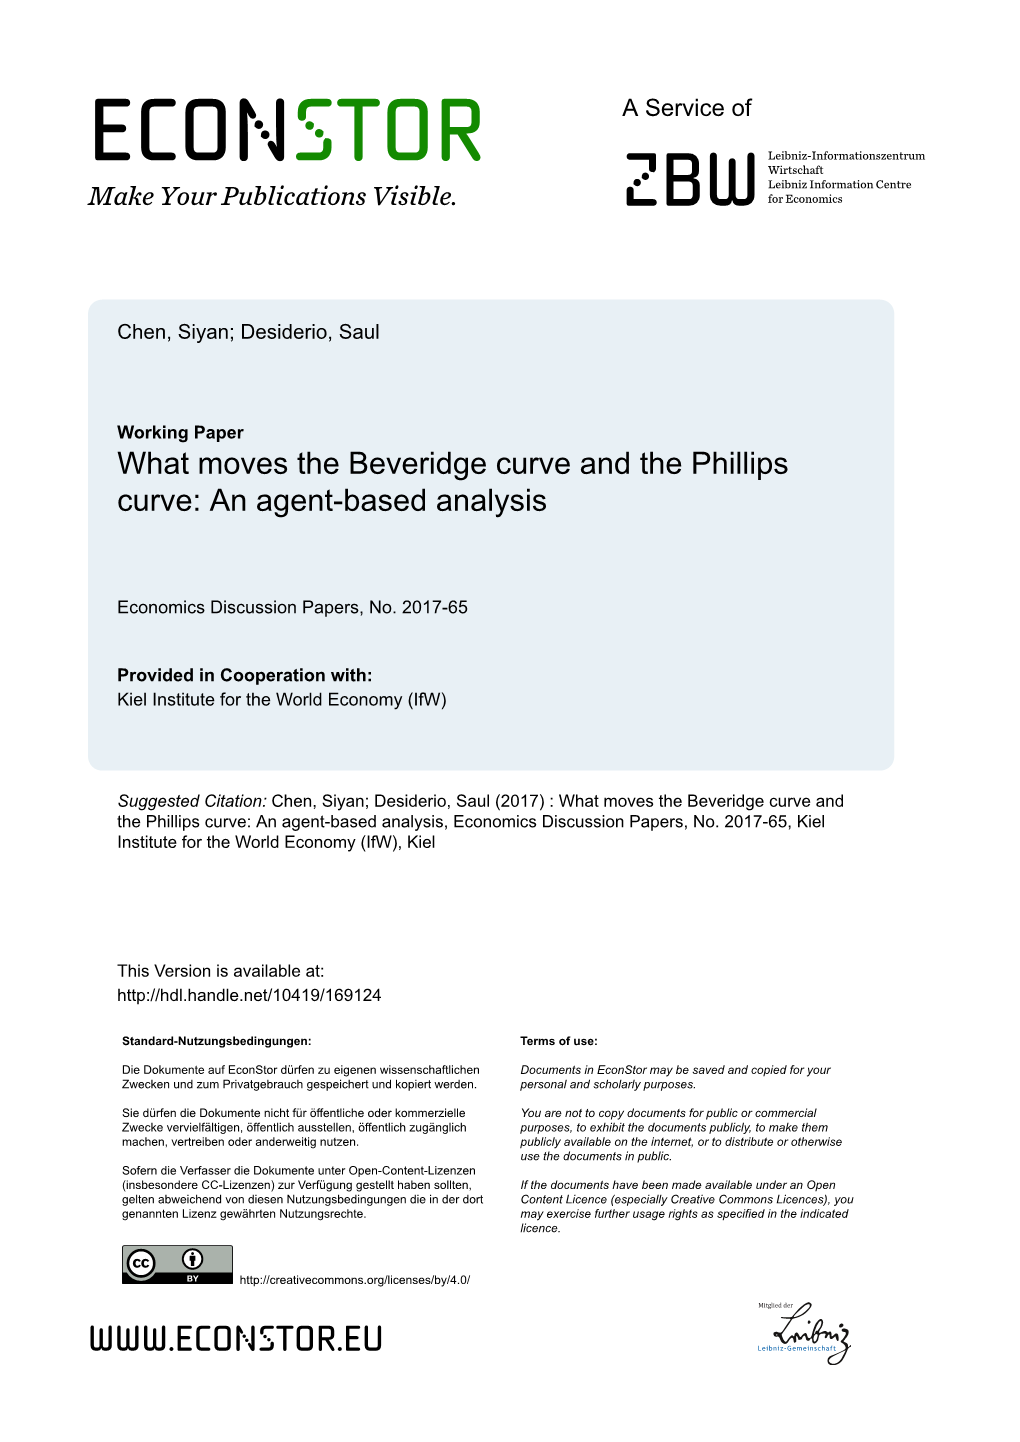 What Moves the Beveridge Curve and the Phillips Curve: an Agent-Based Analysis